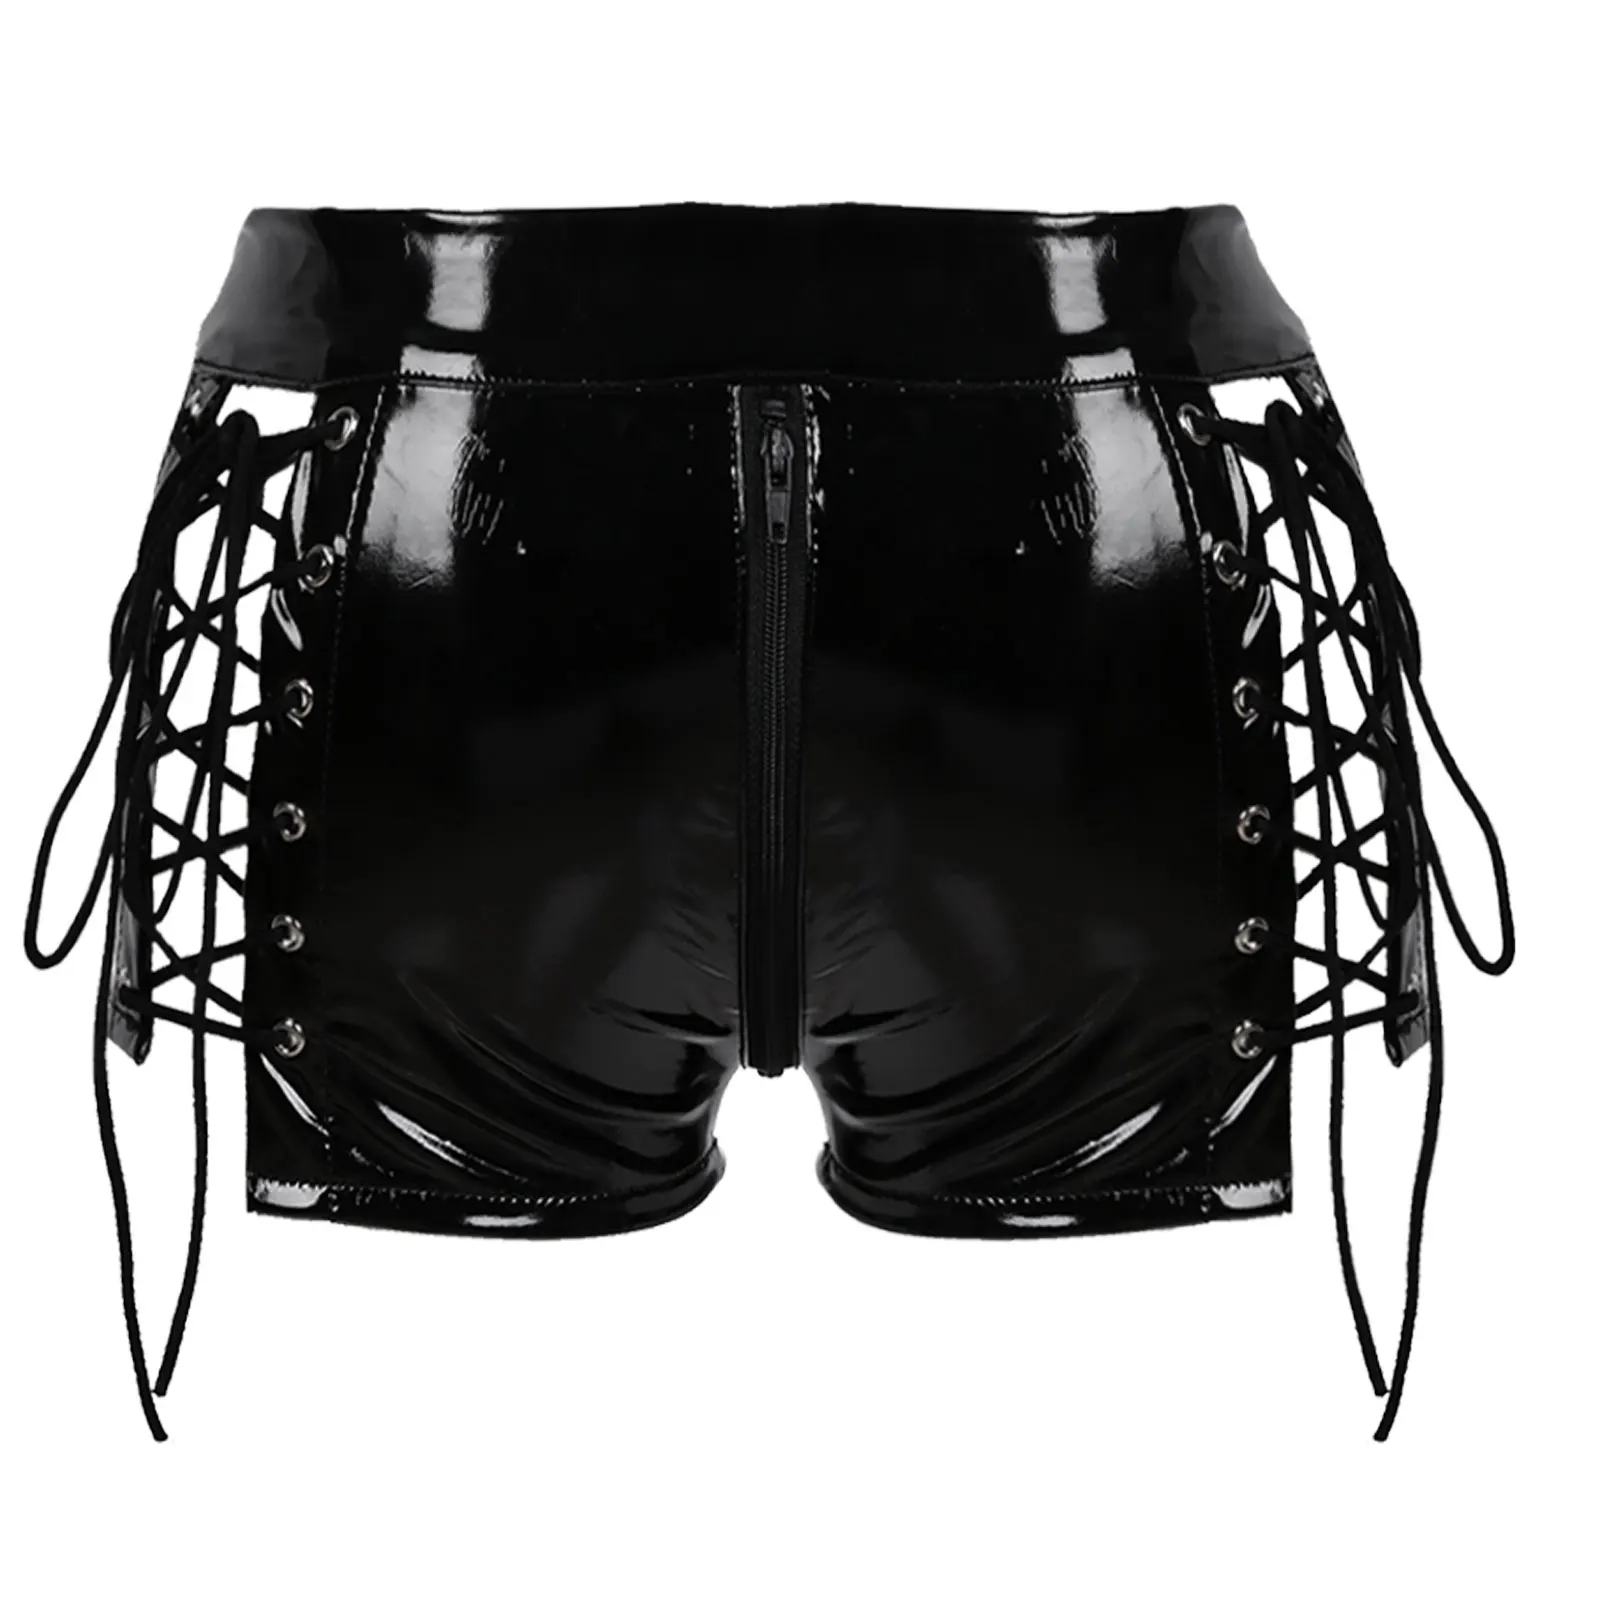 Womens Rave Shorts Wet Look Patent Leather Low Rise Hollow Out Lace-up Double-ended Zipper Crotch Booty Shorts Mini Hot Pants